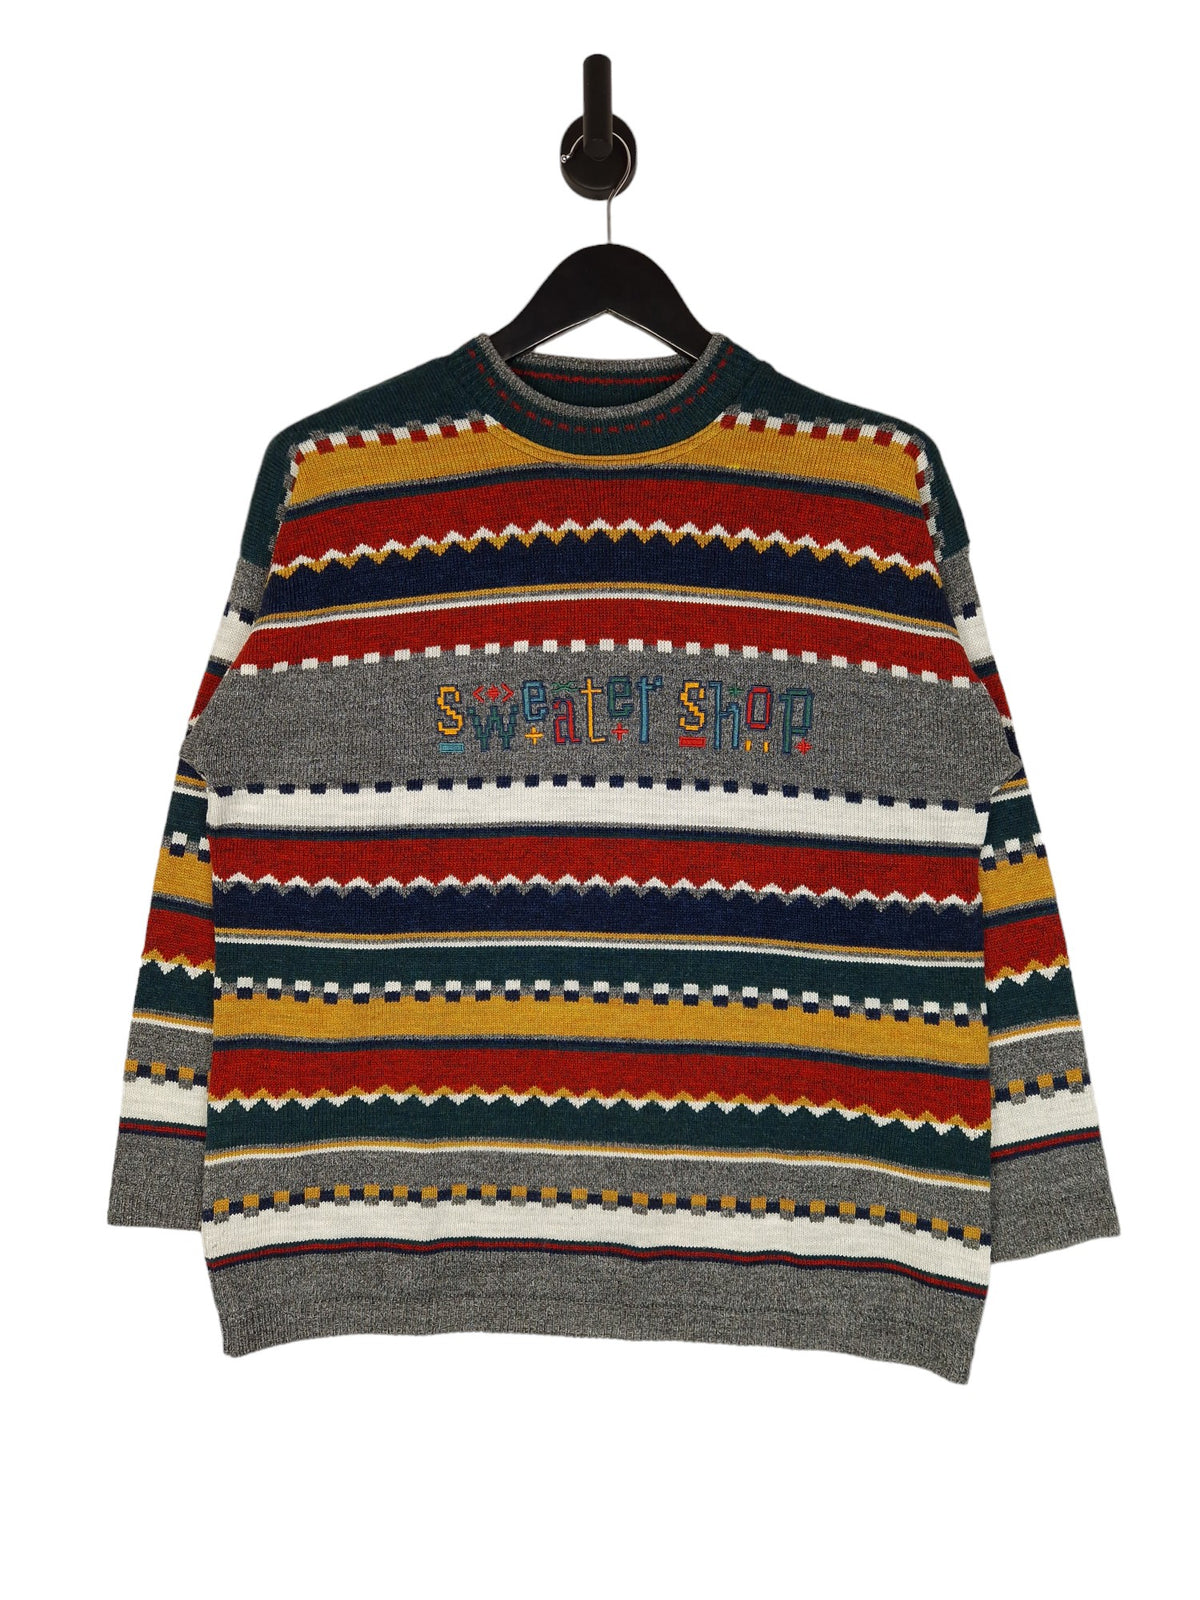 The Sweater Shop Jumper - Size UK 14